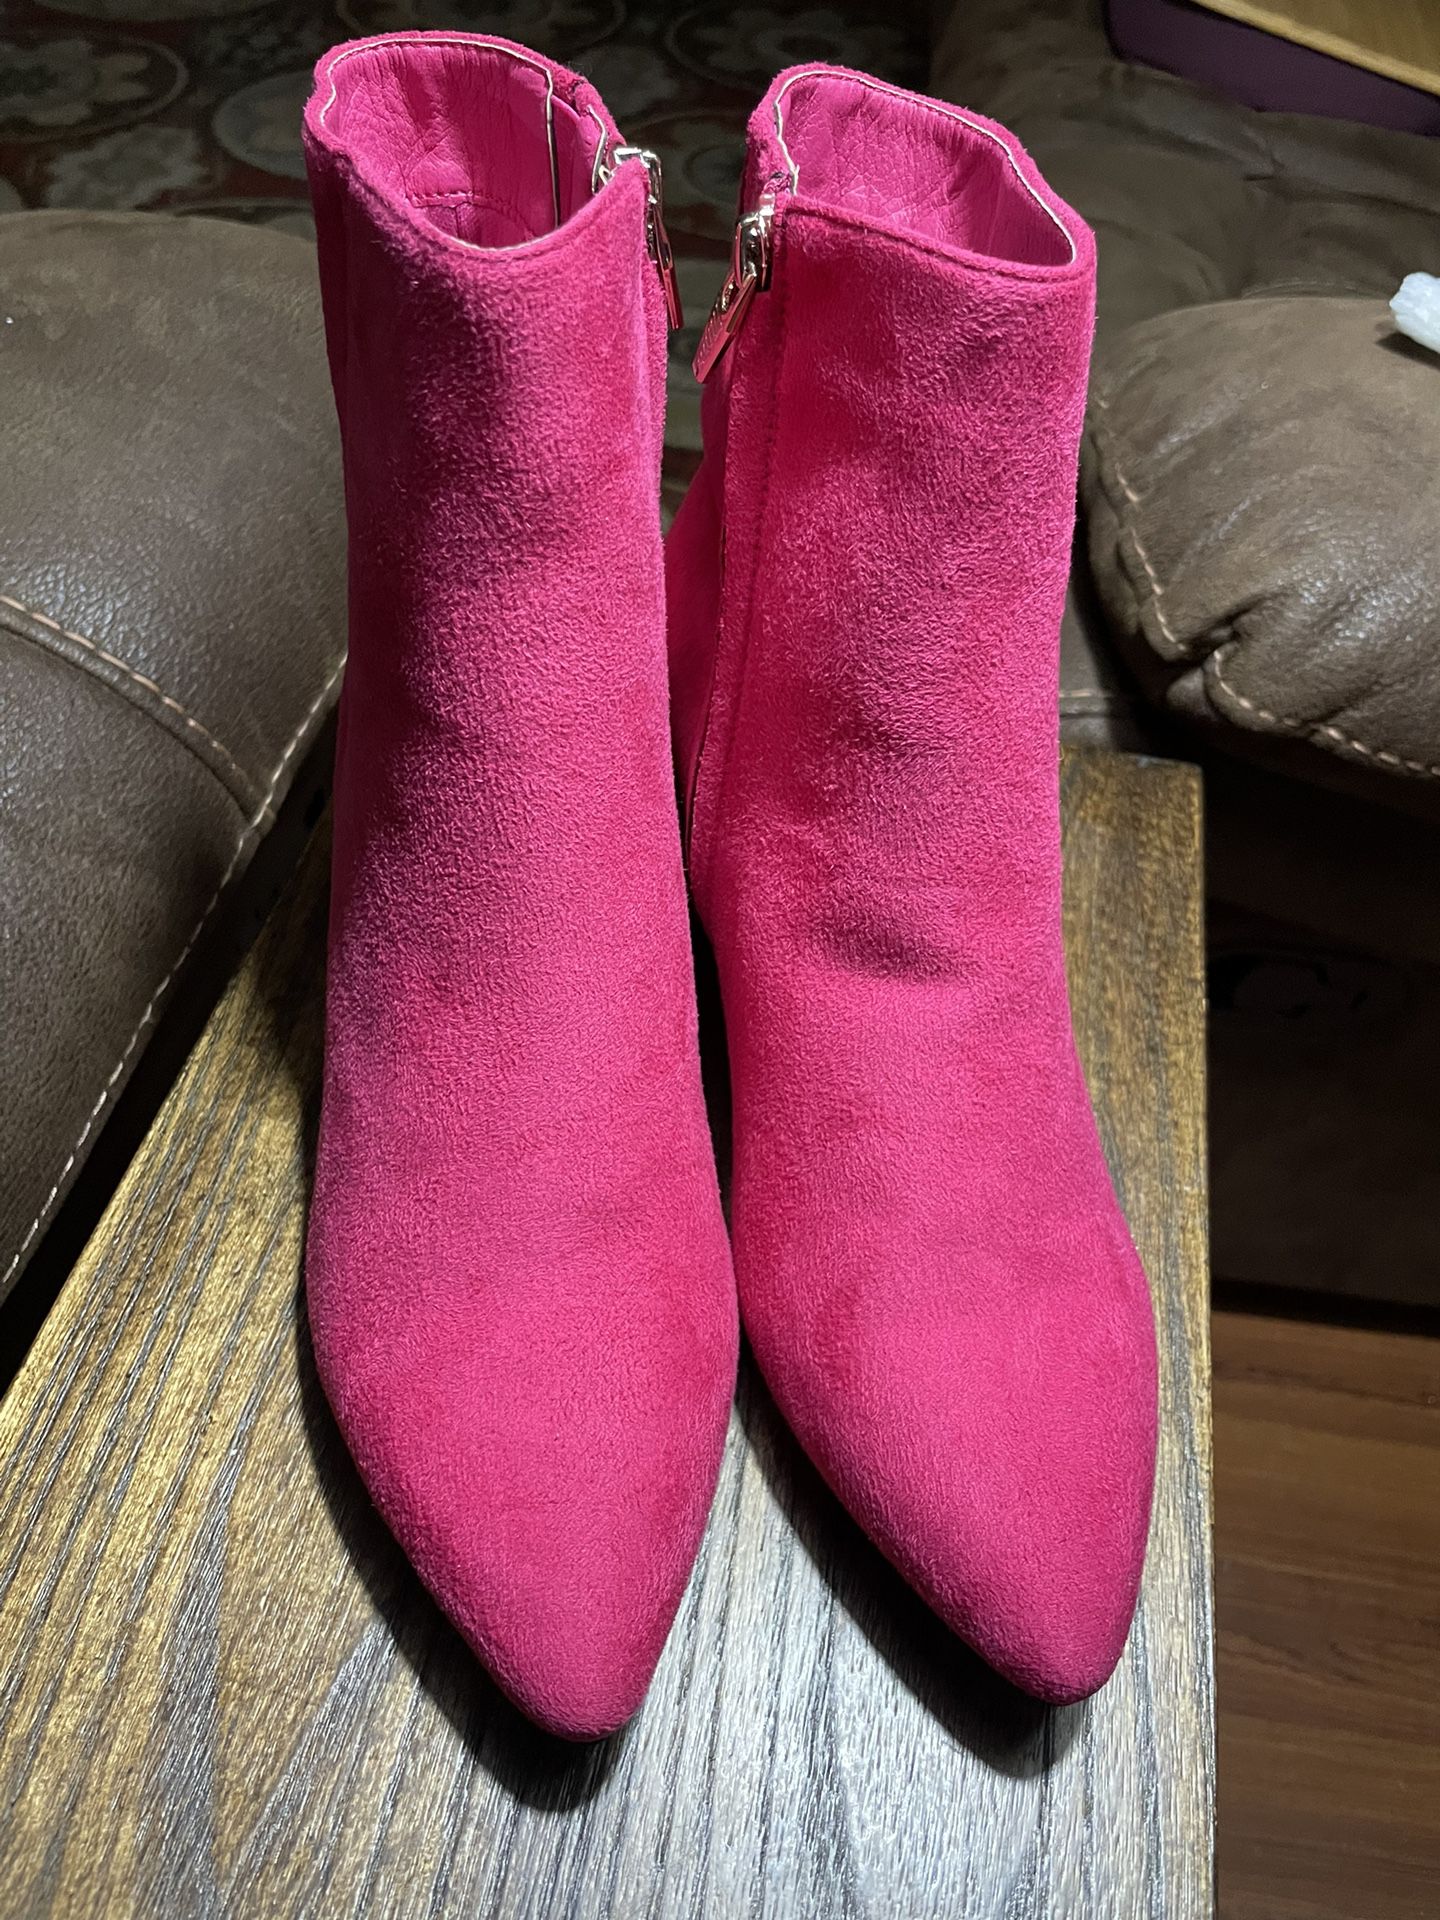 Pink suede Boots - Sz 9